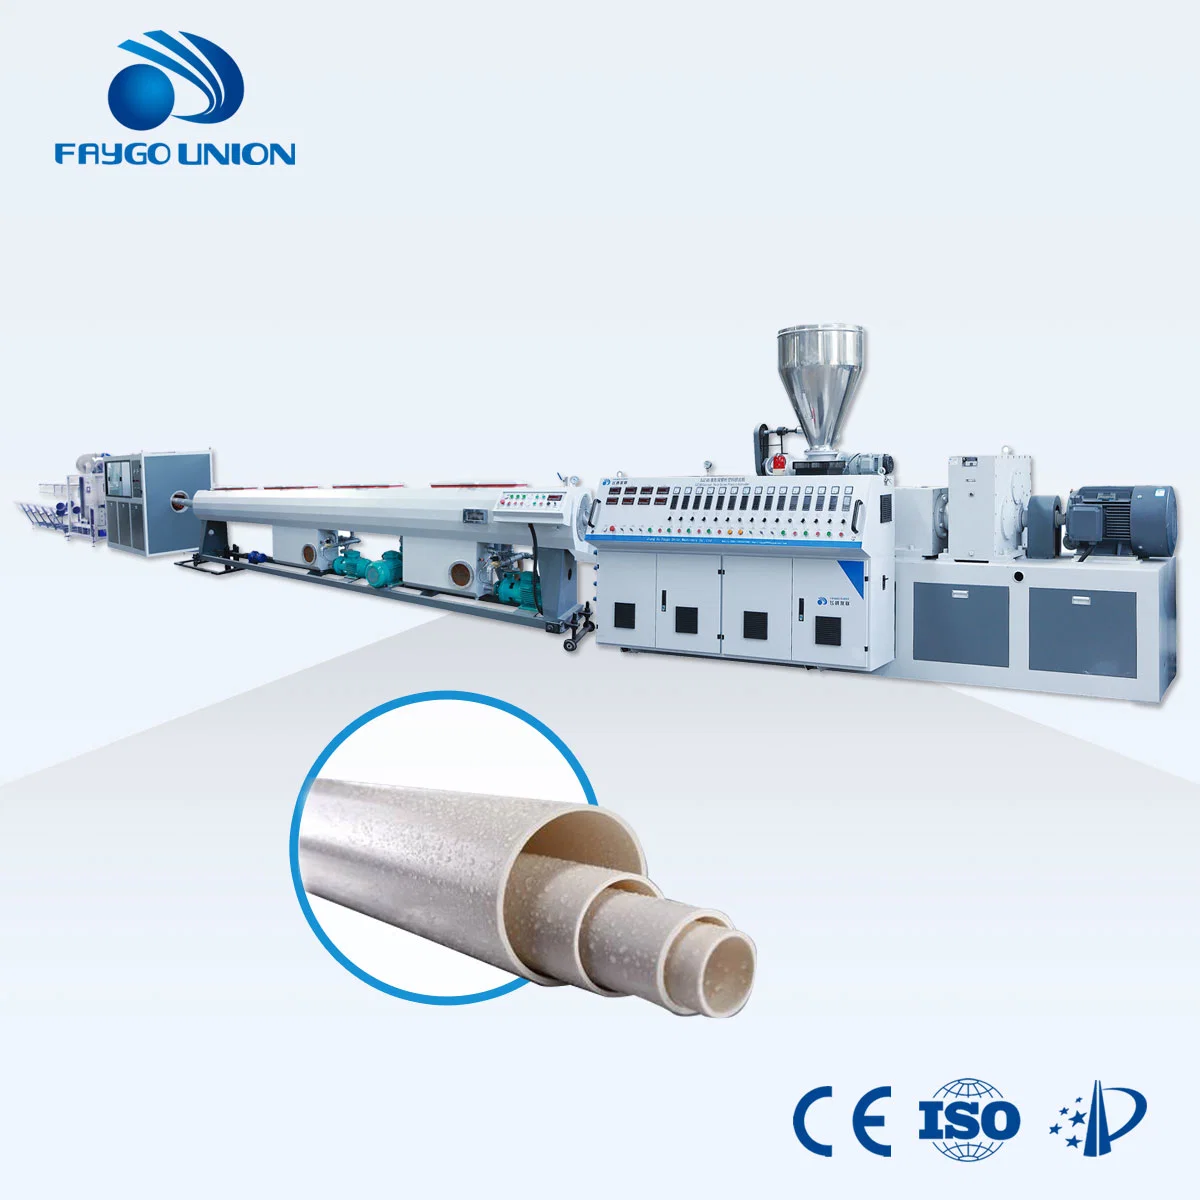 50-315mm PVC Drain Pipe Extruding Machine/Line/Equipment/Plant for Sale